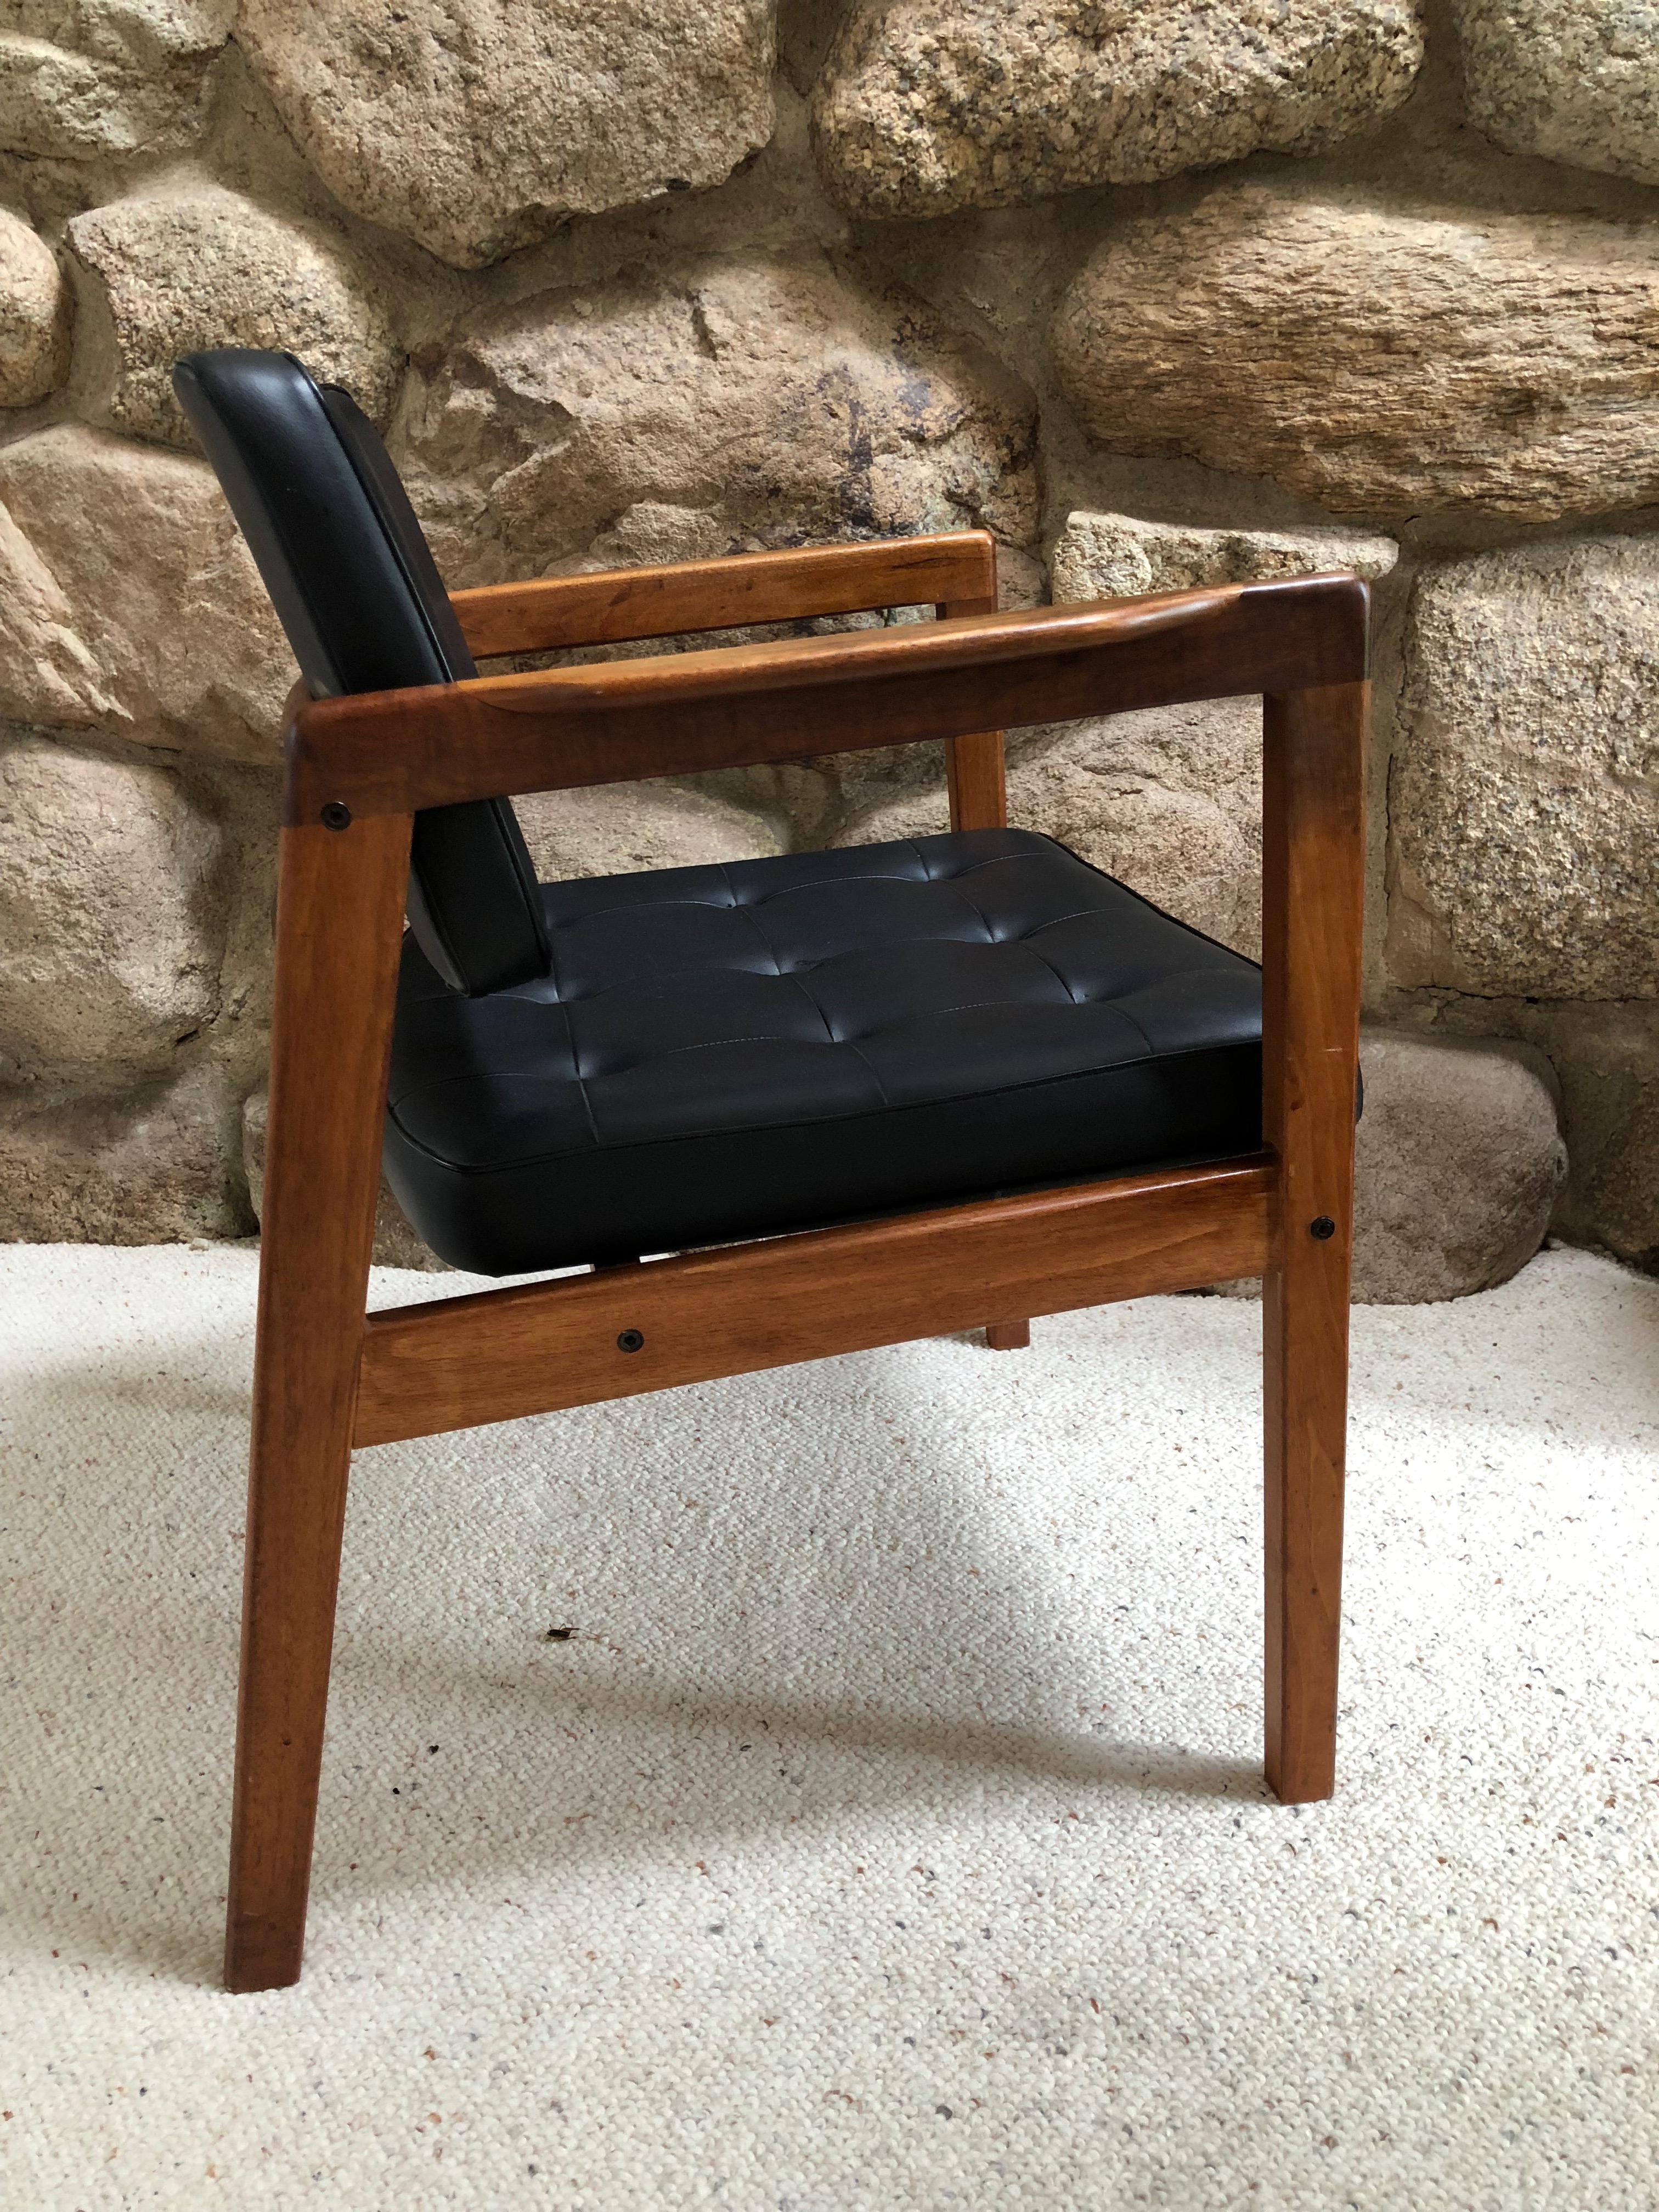 Handsome Danish Modern midcentury armchair by Illum Wikkelso for Niels Eilersen. Made of solid teak wood and upholstered in the original black faux leather. Measures: Arm height 26.